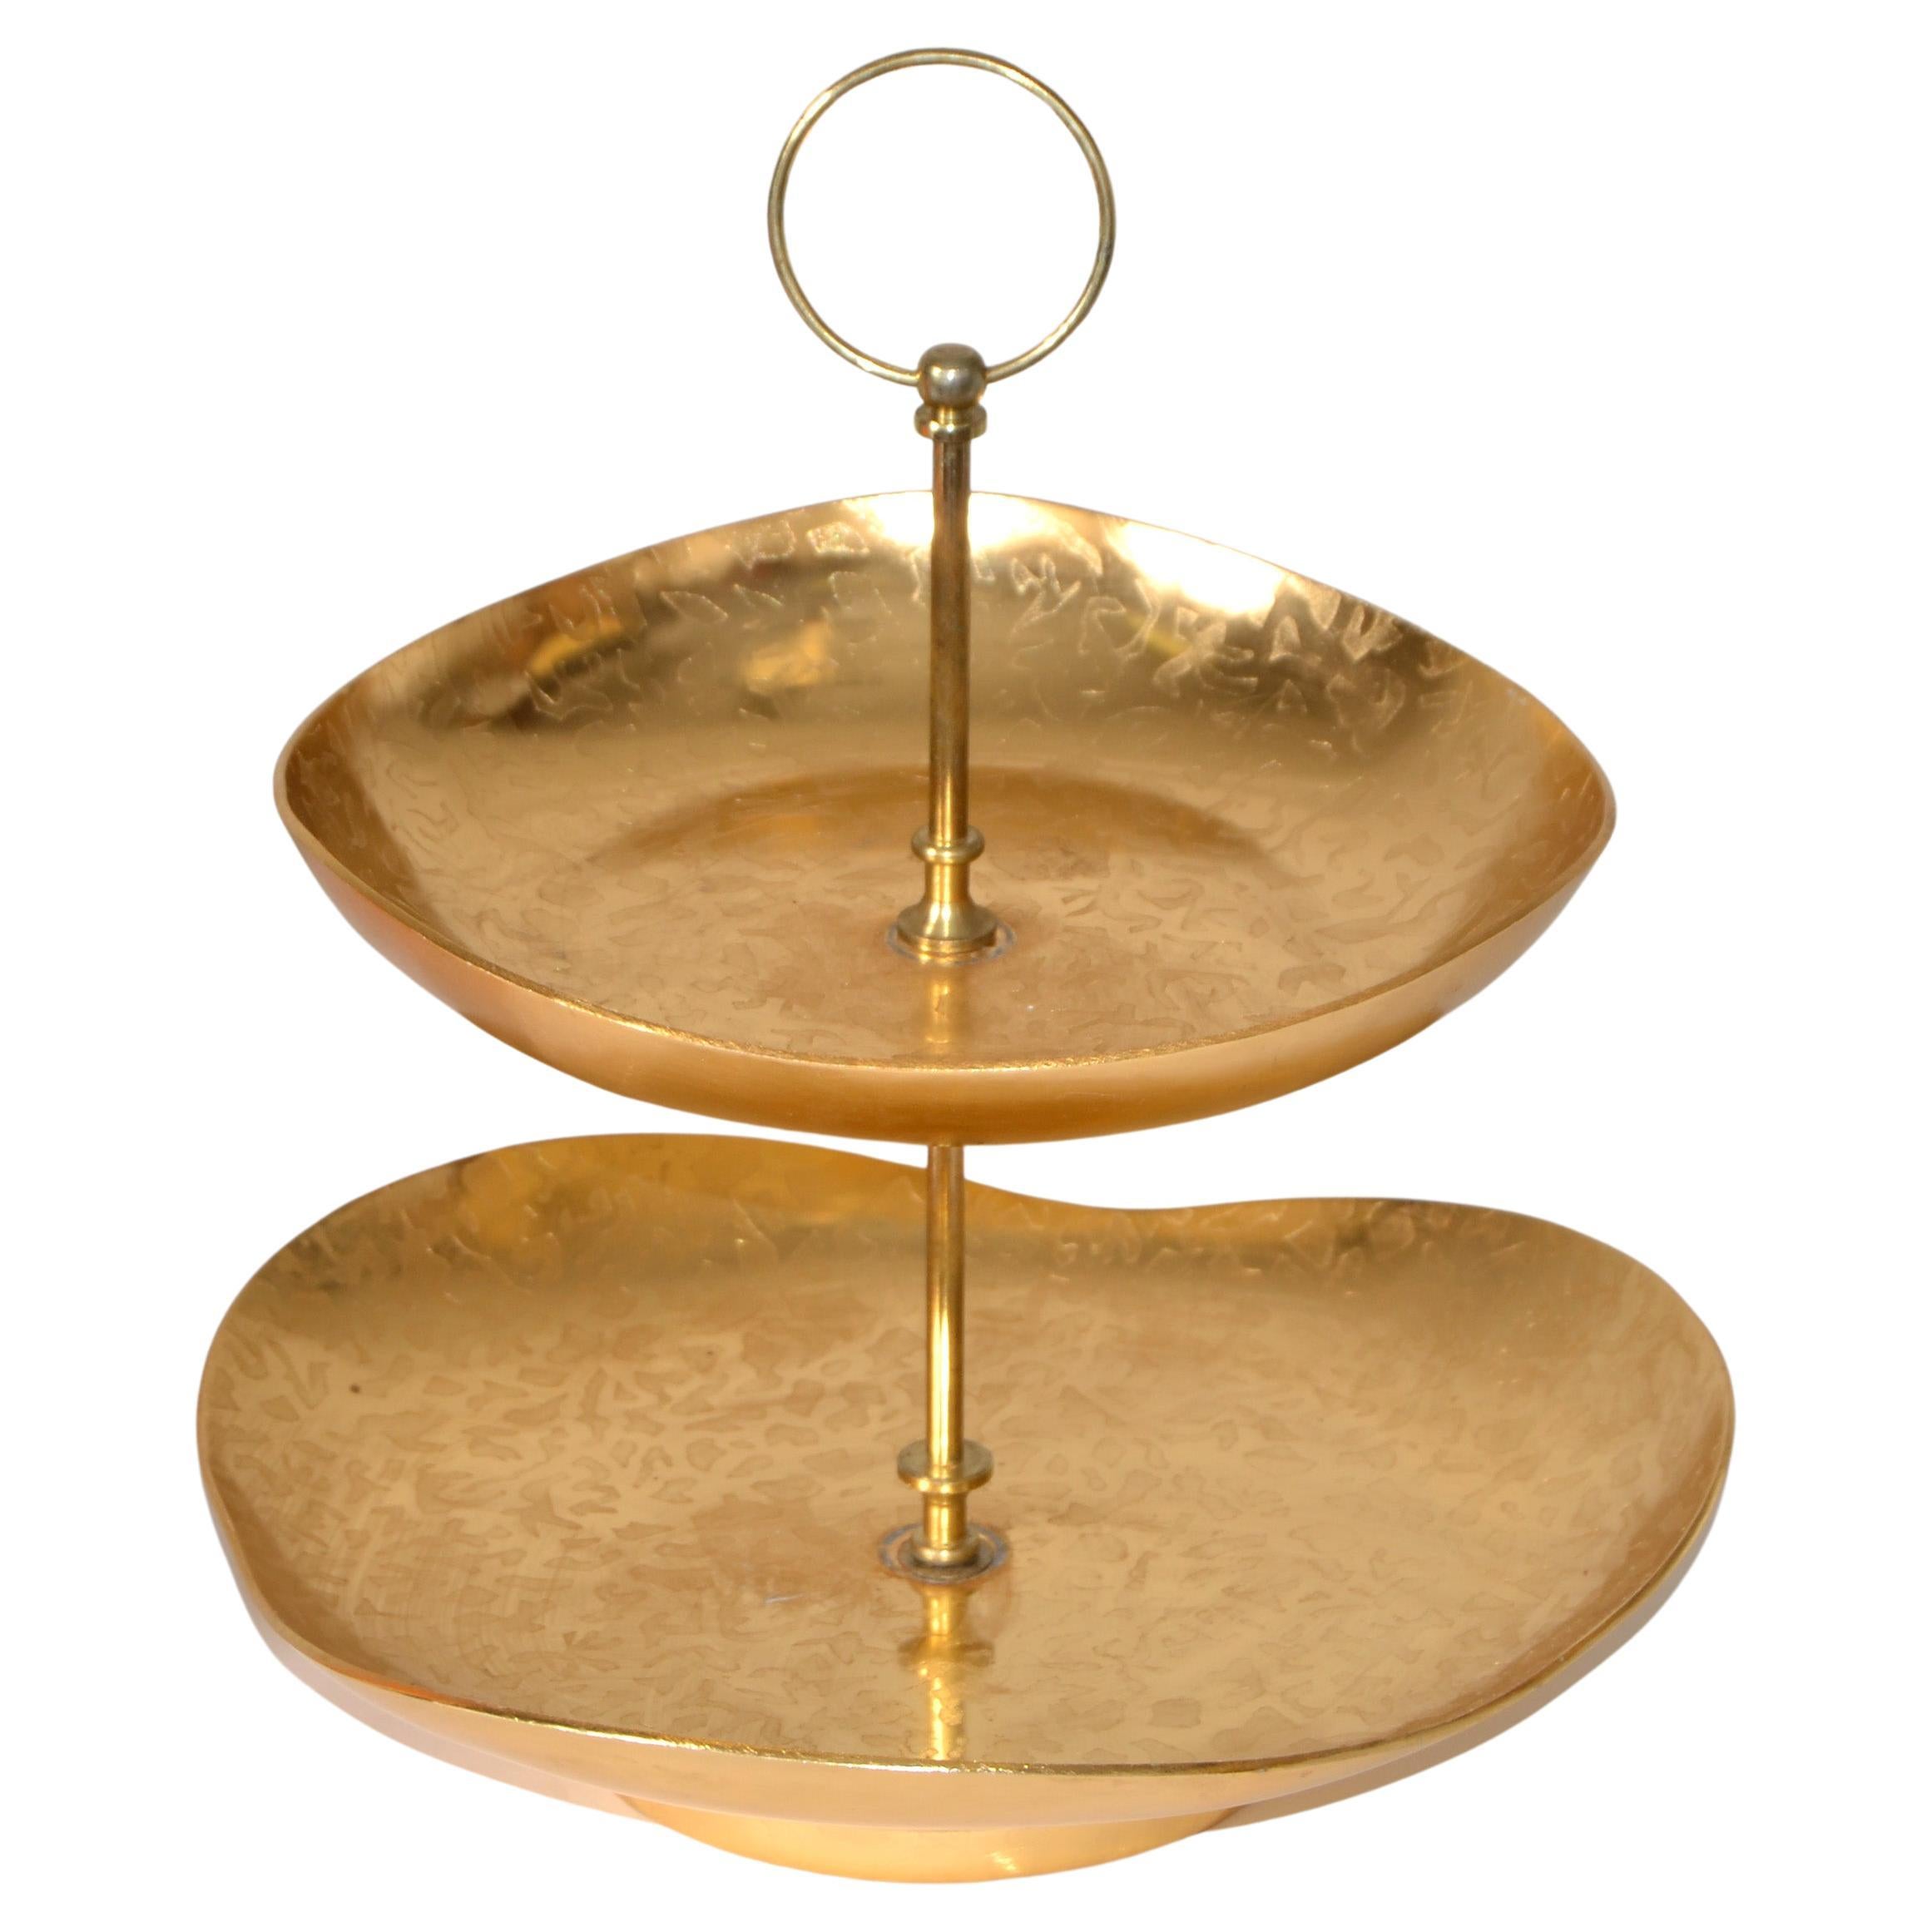 Charming Gold Plate 2 tier Center Handled snack, pastry, cake treats stand or serving tray designed by Lurelle Guild. 
The textured free-form biomorphic relief design looks very Mid-Century Modern and was made from 1934 to 1965.
Beautifully coupe